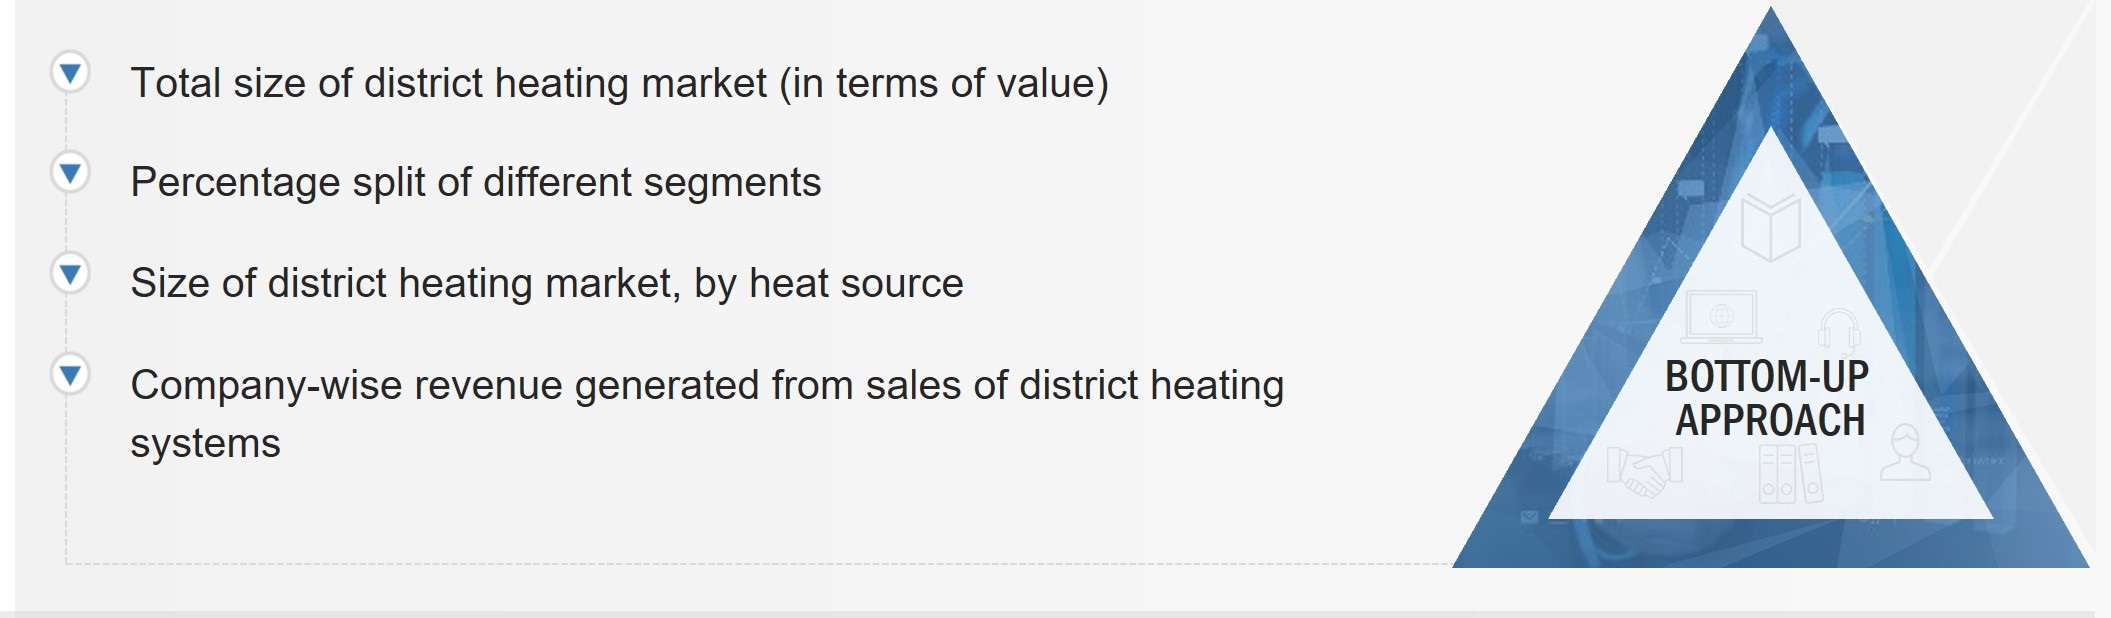 District Heating Market Size, and Top-Down Approach 